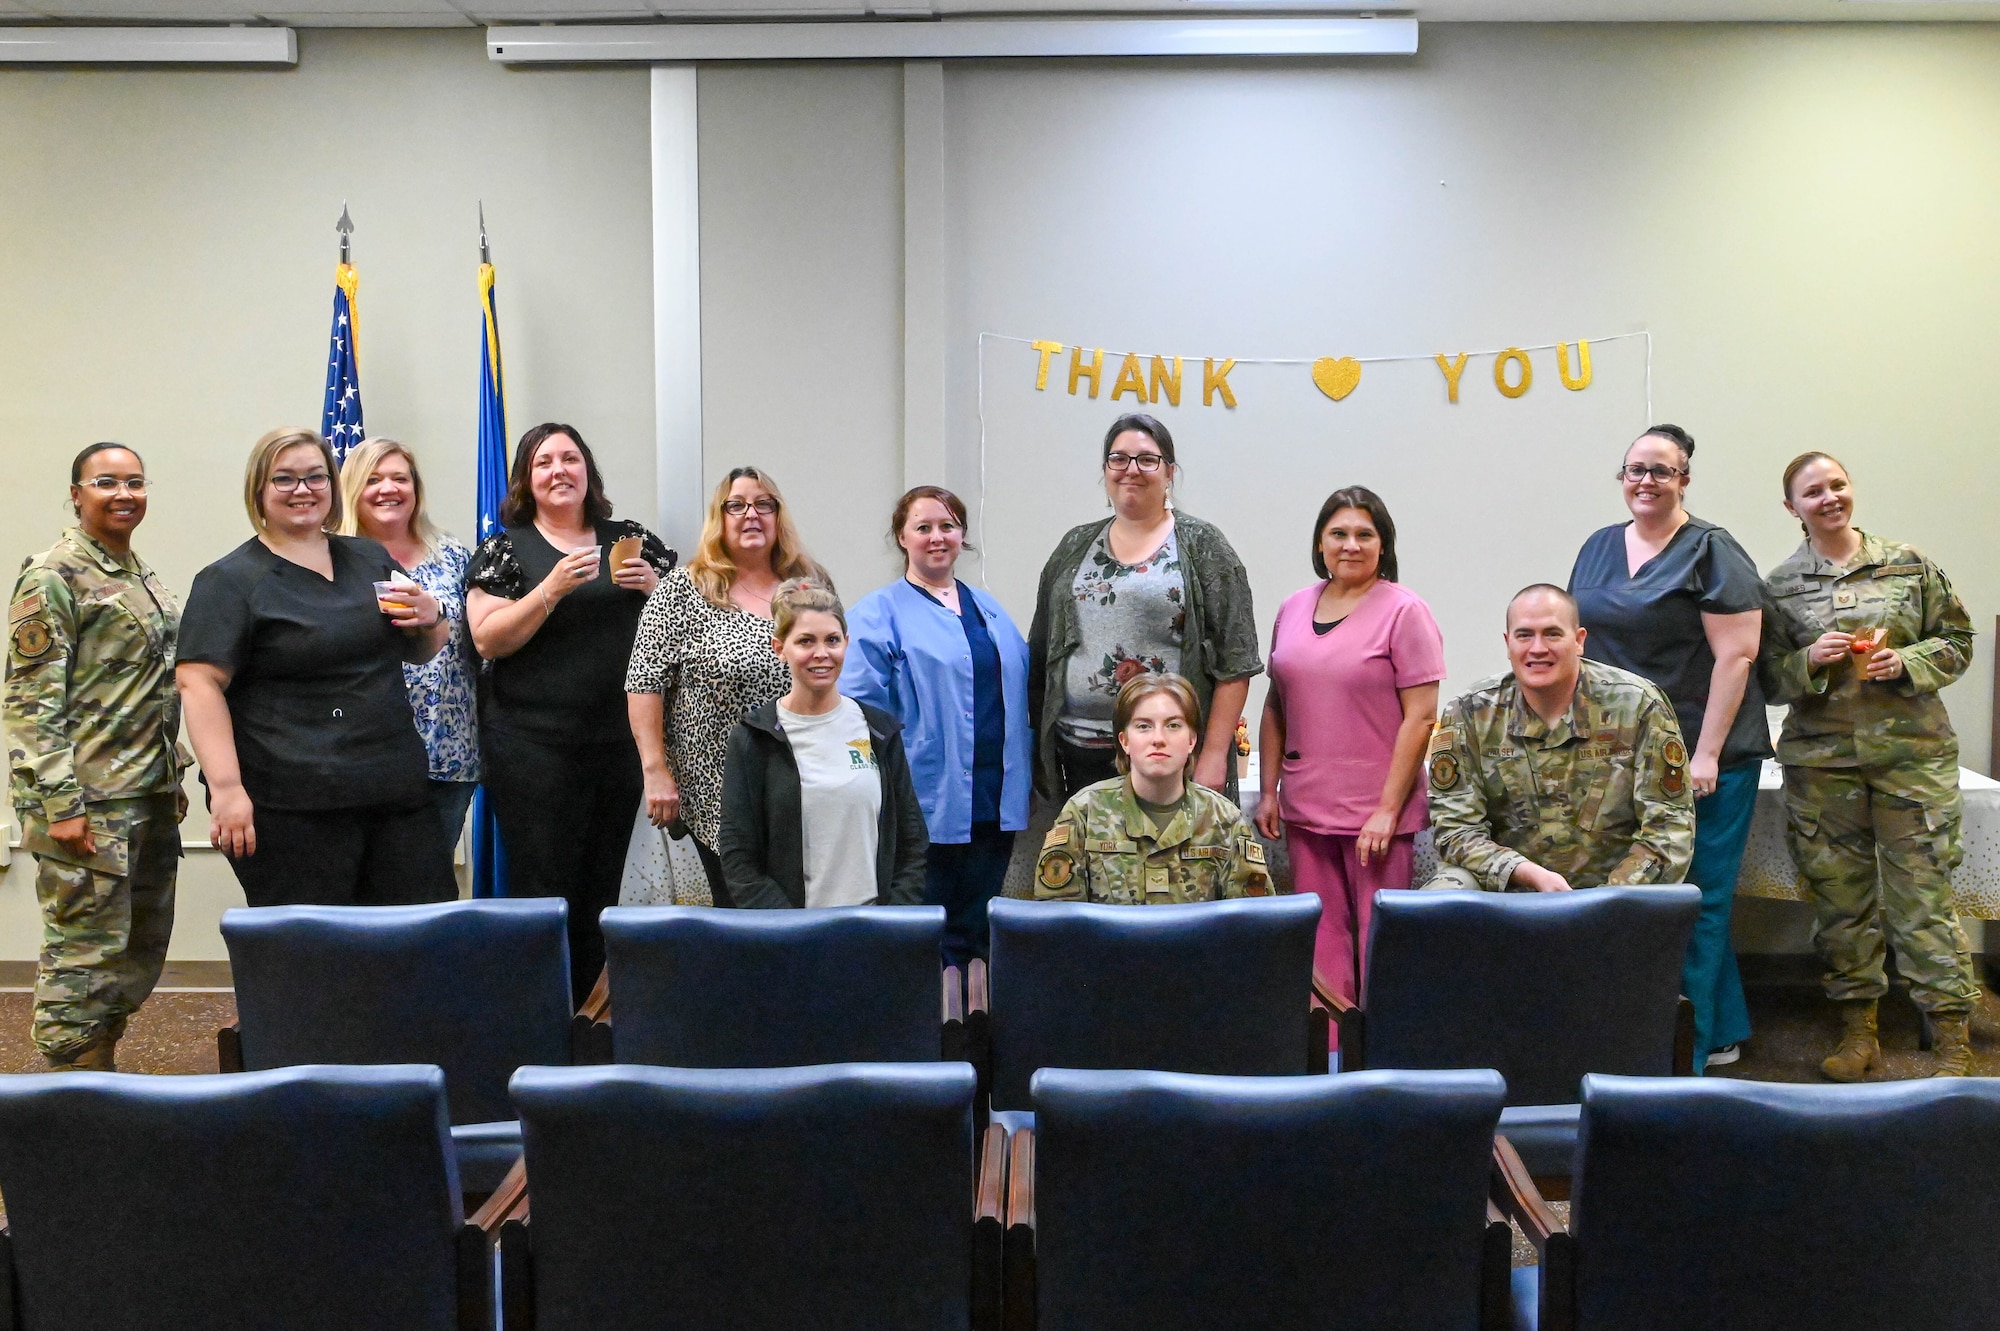 Nurses and medical technicians from the 97th Medical Group pose for a photo at Altus Air Force Base, Oklahoma, May 12, 2022. The group closed National Nurses and Medical Technicians week by celebrating with snacks and desserts. (U.S. Air Force photo Senior Airman Kayla Christenson)